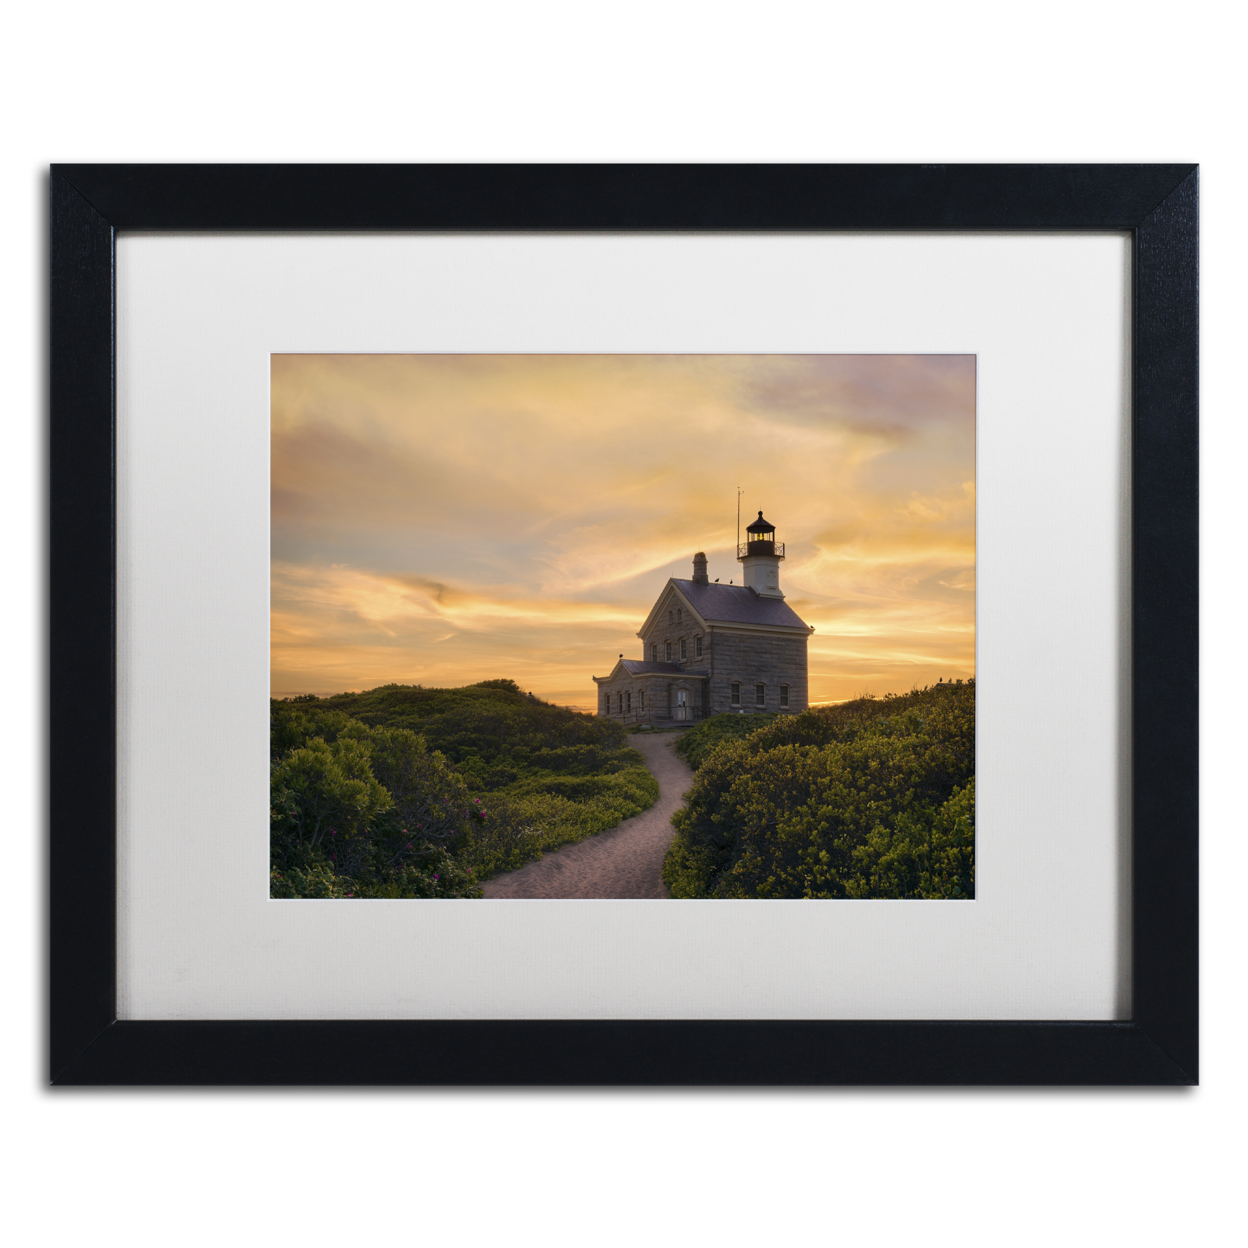 Michael Blanchette Photography 'Keeper On The Hill' Black Wooden Framed Art 18 X 22 Inches